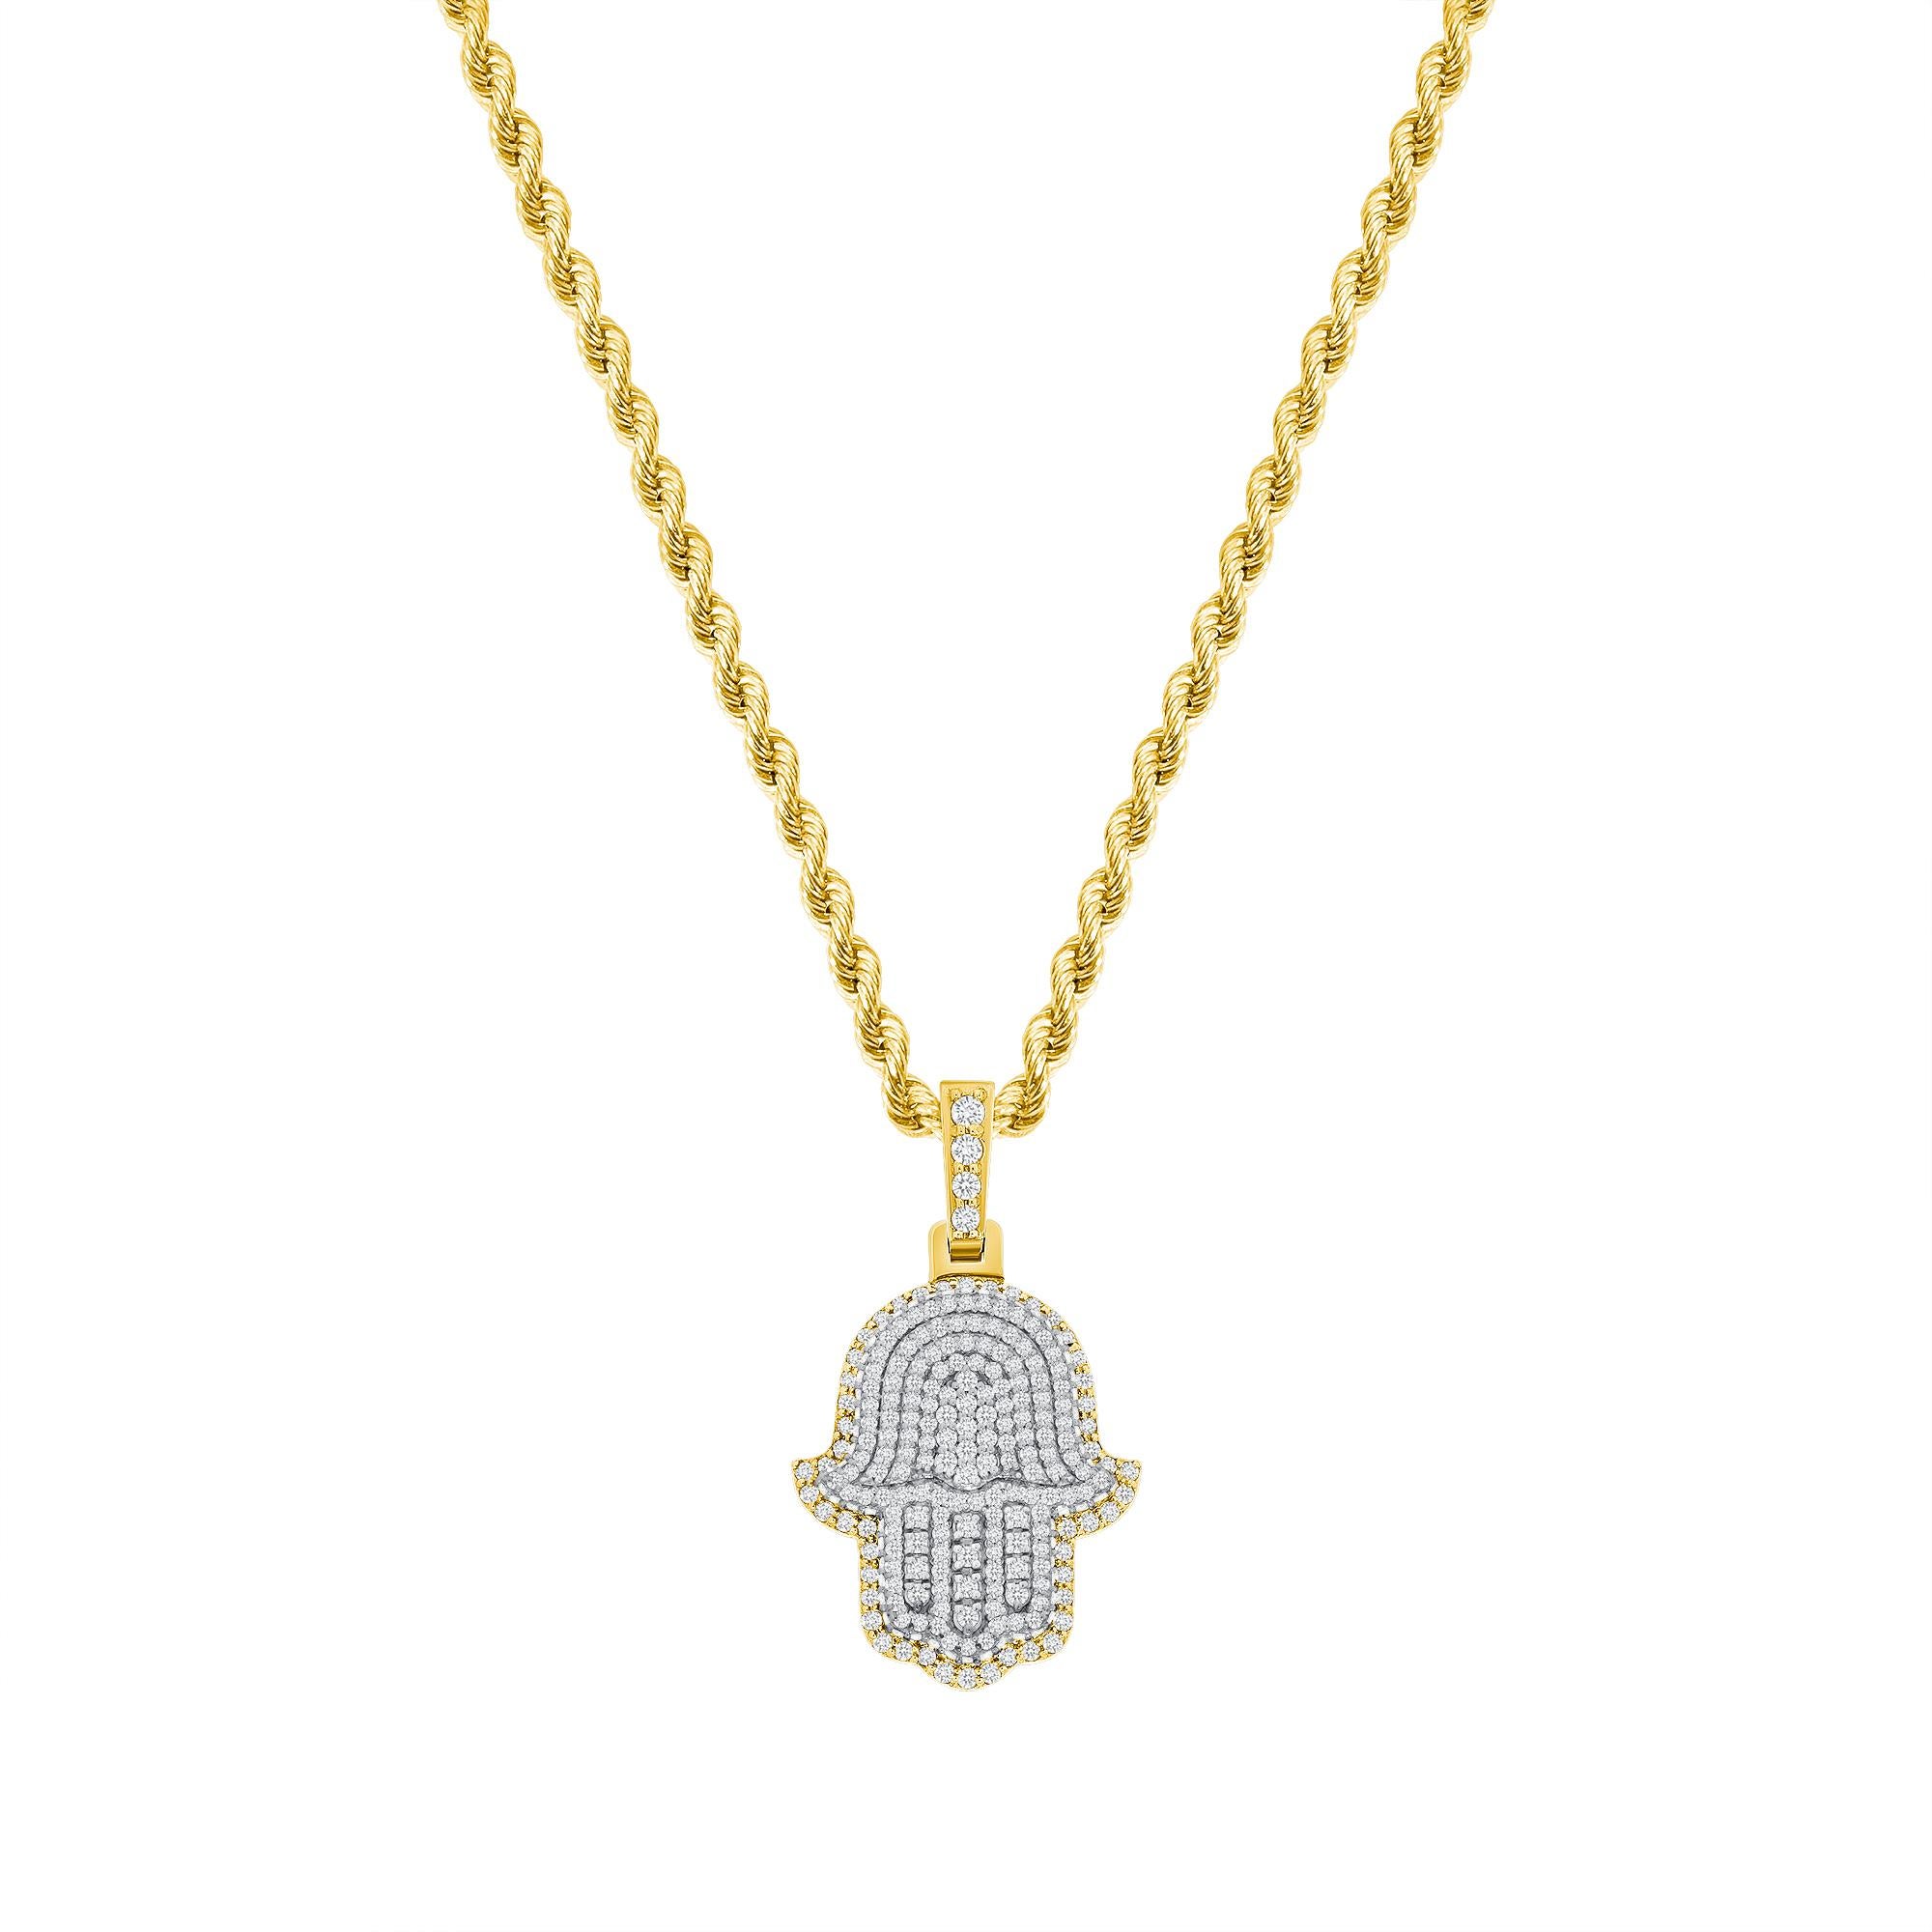 This Hamsa diamond necklace provides both a spiritual and fashionable on trend look. 

Metal: 14k Gold
Diamond Cut: Round
Total Diamond Carats: 2 Carats
Diamond Clarity: VS
Diamond Color: F-G
Necklace Length: 24 Inches
Color: Yellow Gold
